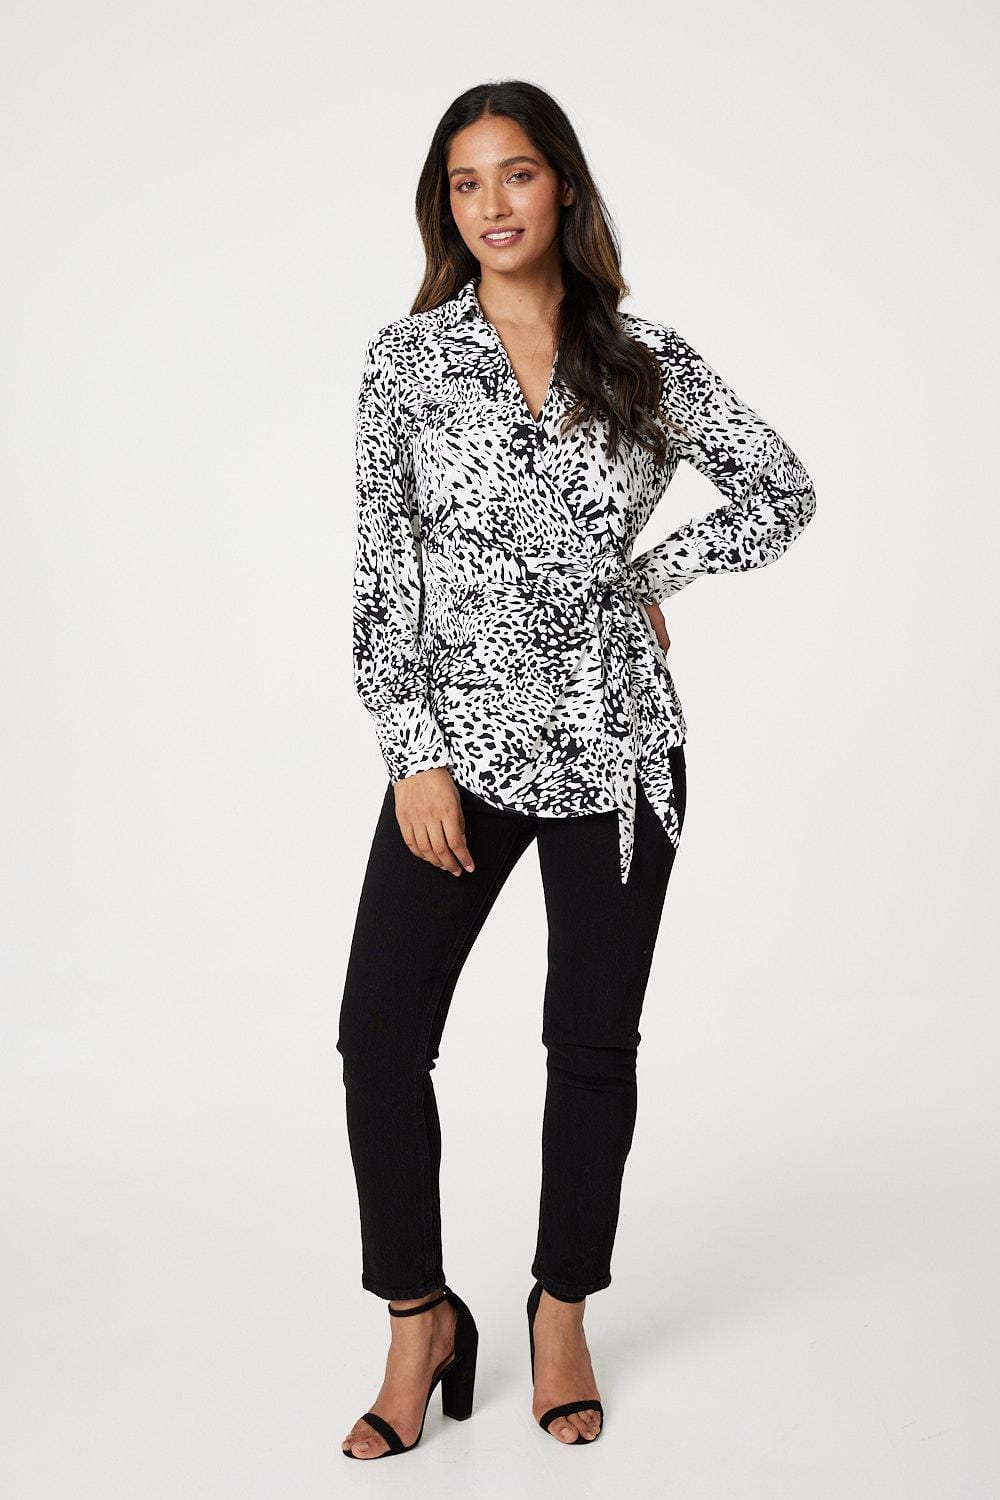 Black And White | Animal Print Wrap Front Blouse : Model is 5'7.5"/171 cm and wears UK8/EU36/US4/AUS8